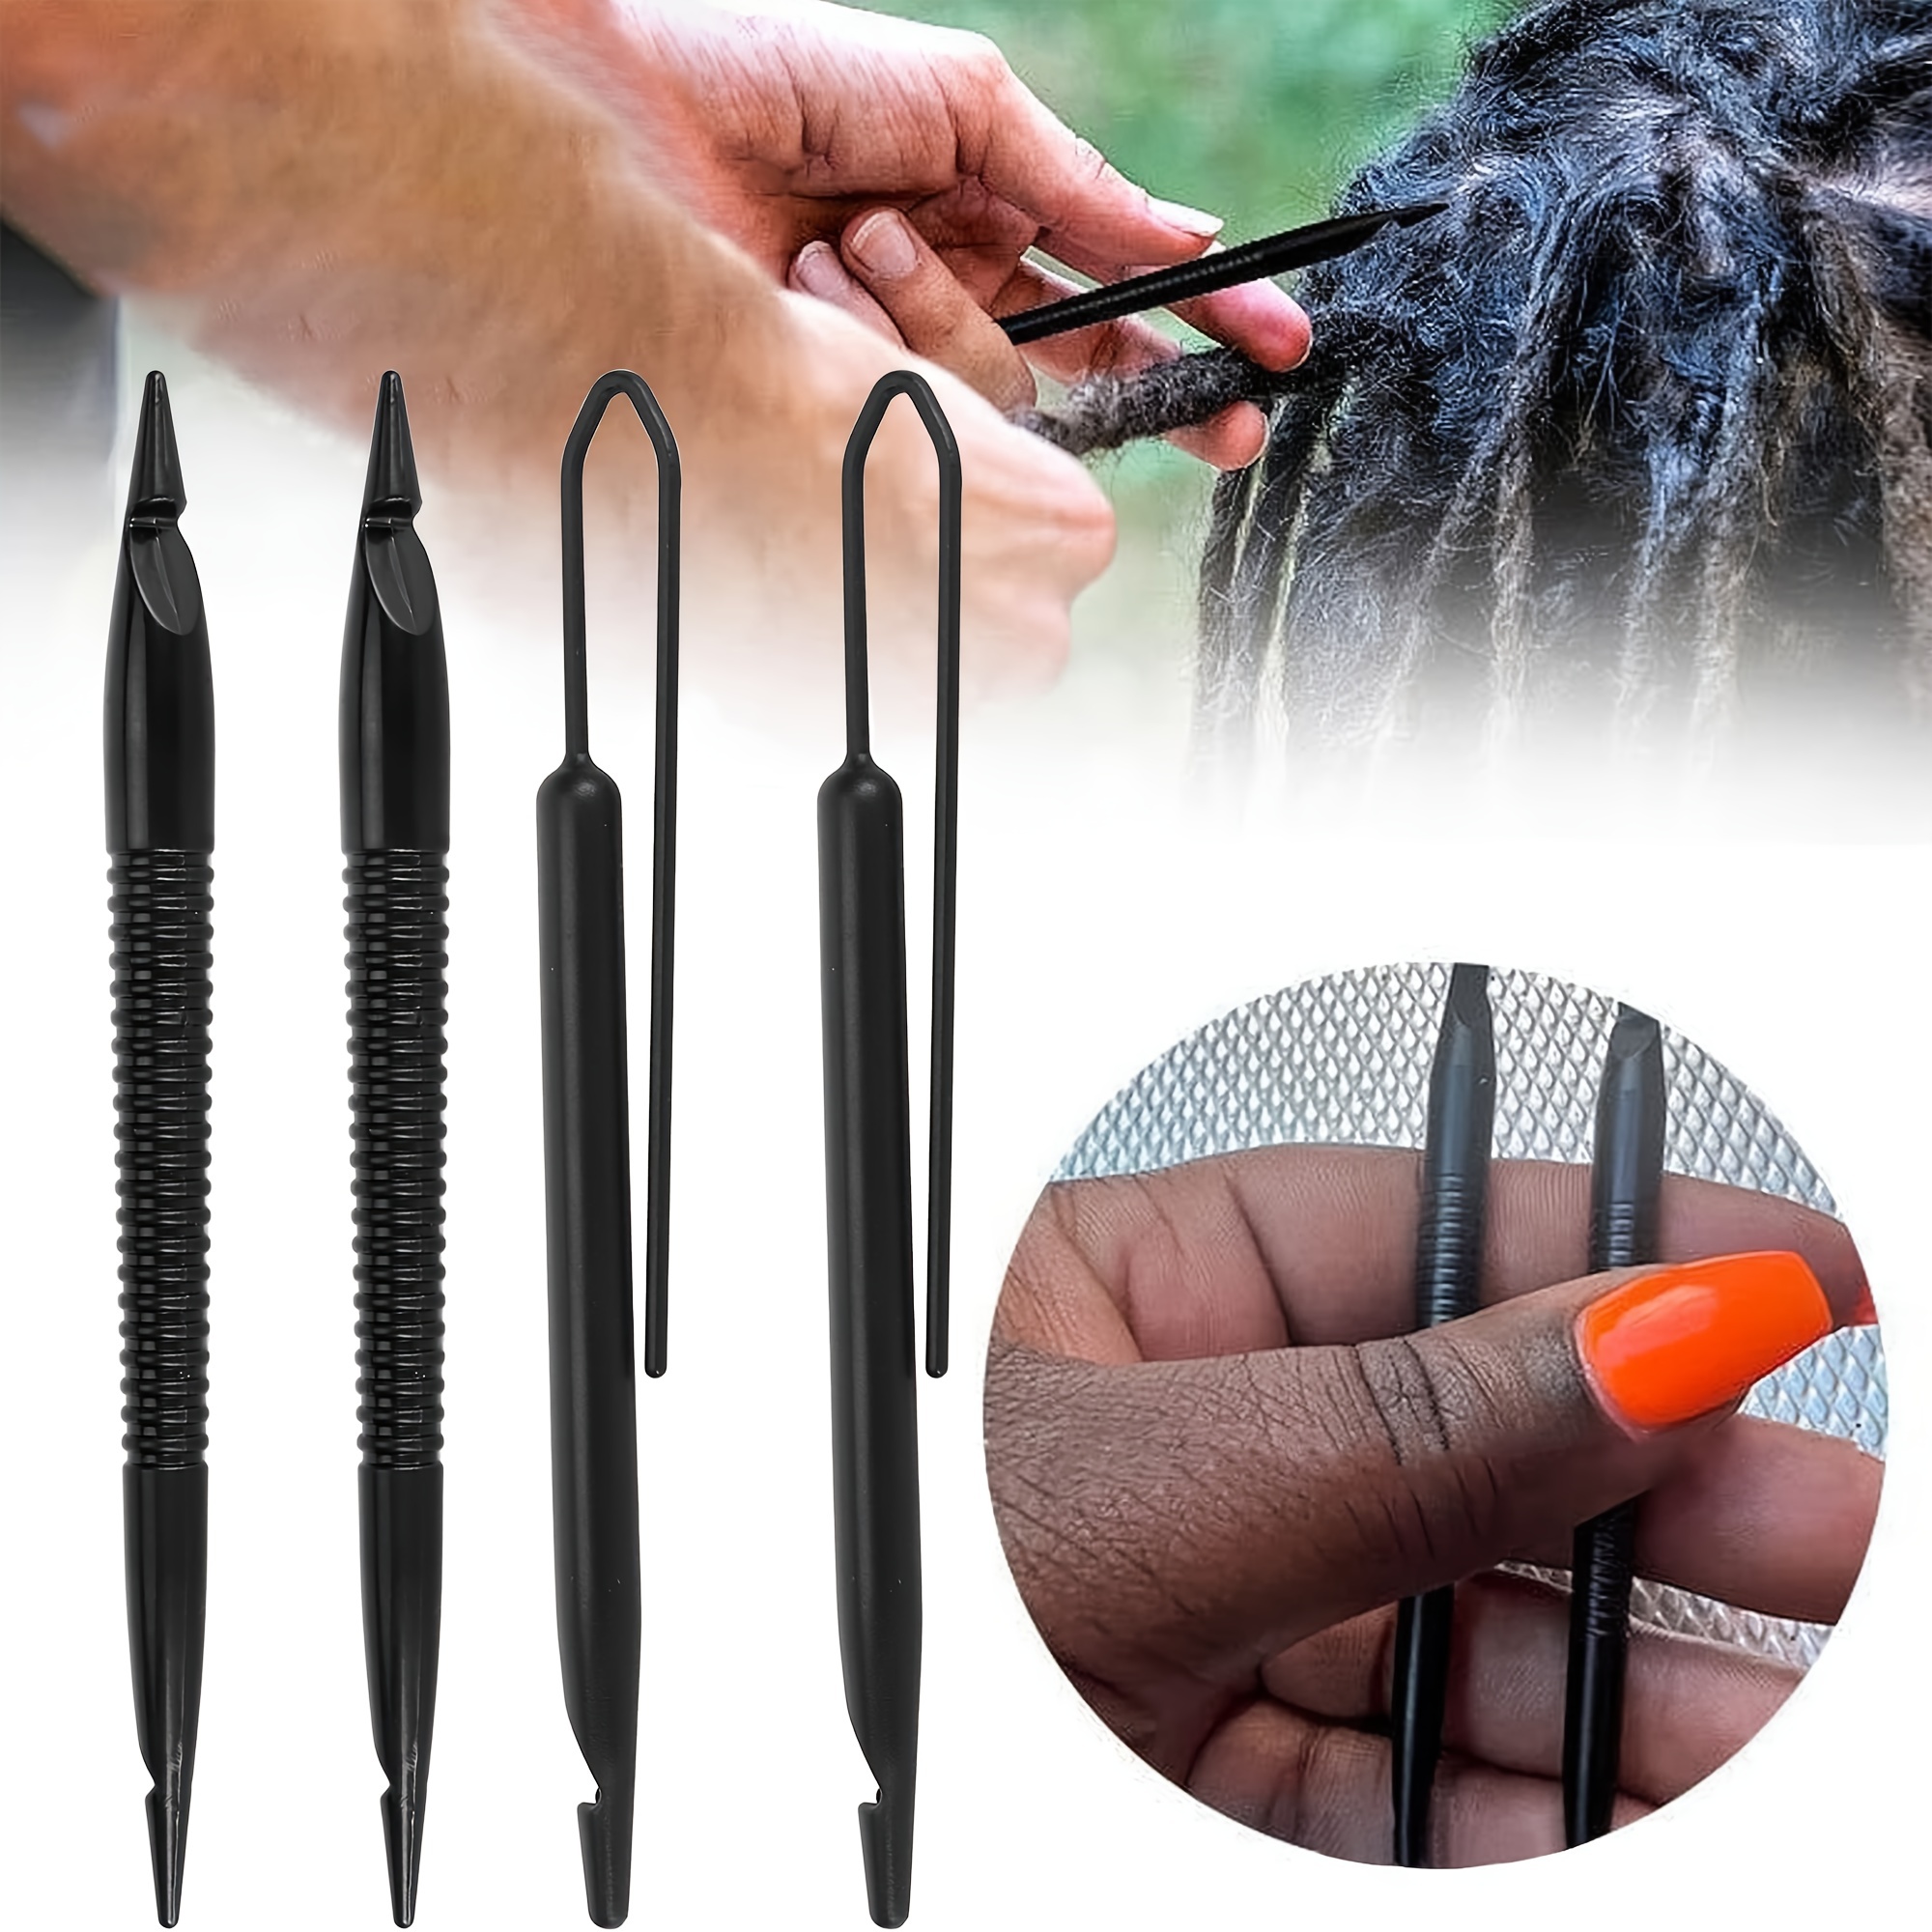 5Pieces s Tool Set s Crochet Hook Hair Locking Tool for Braid